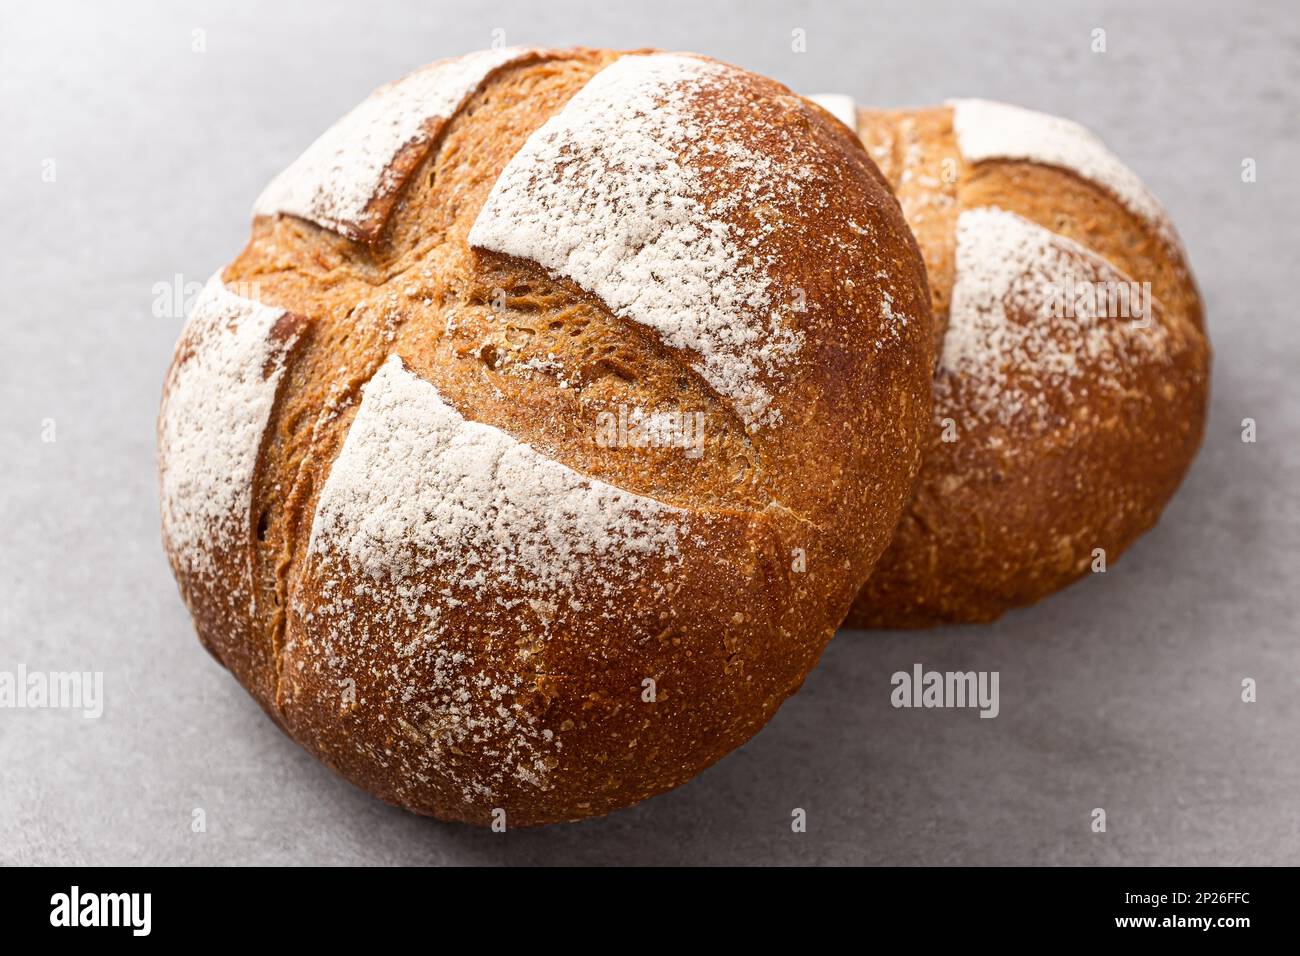 french food culture. bread for dinner. traditional bread Stock Photo